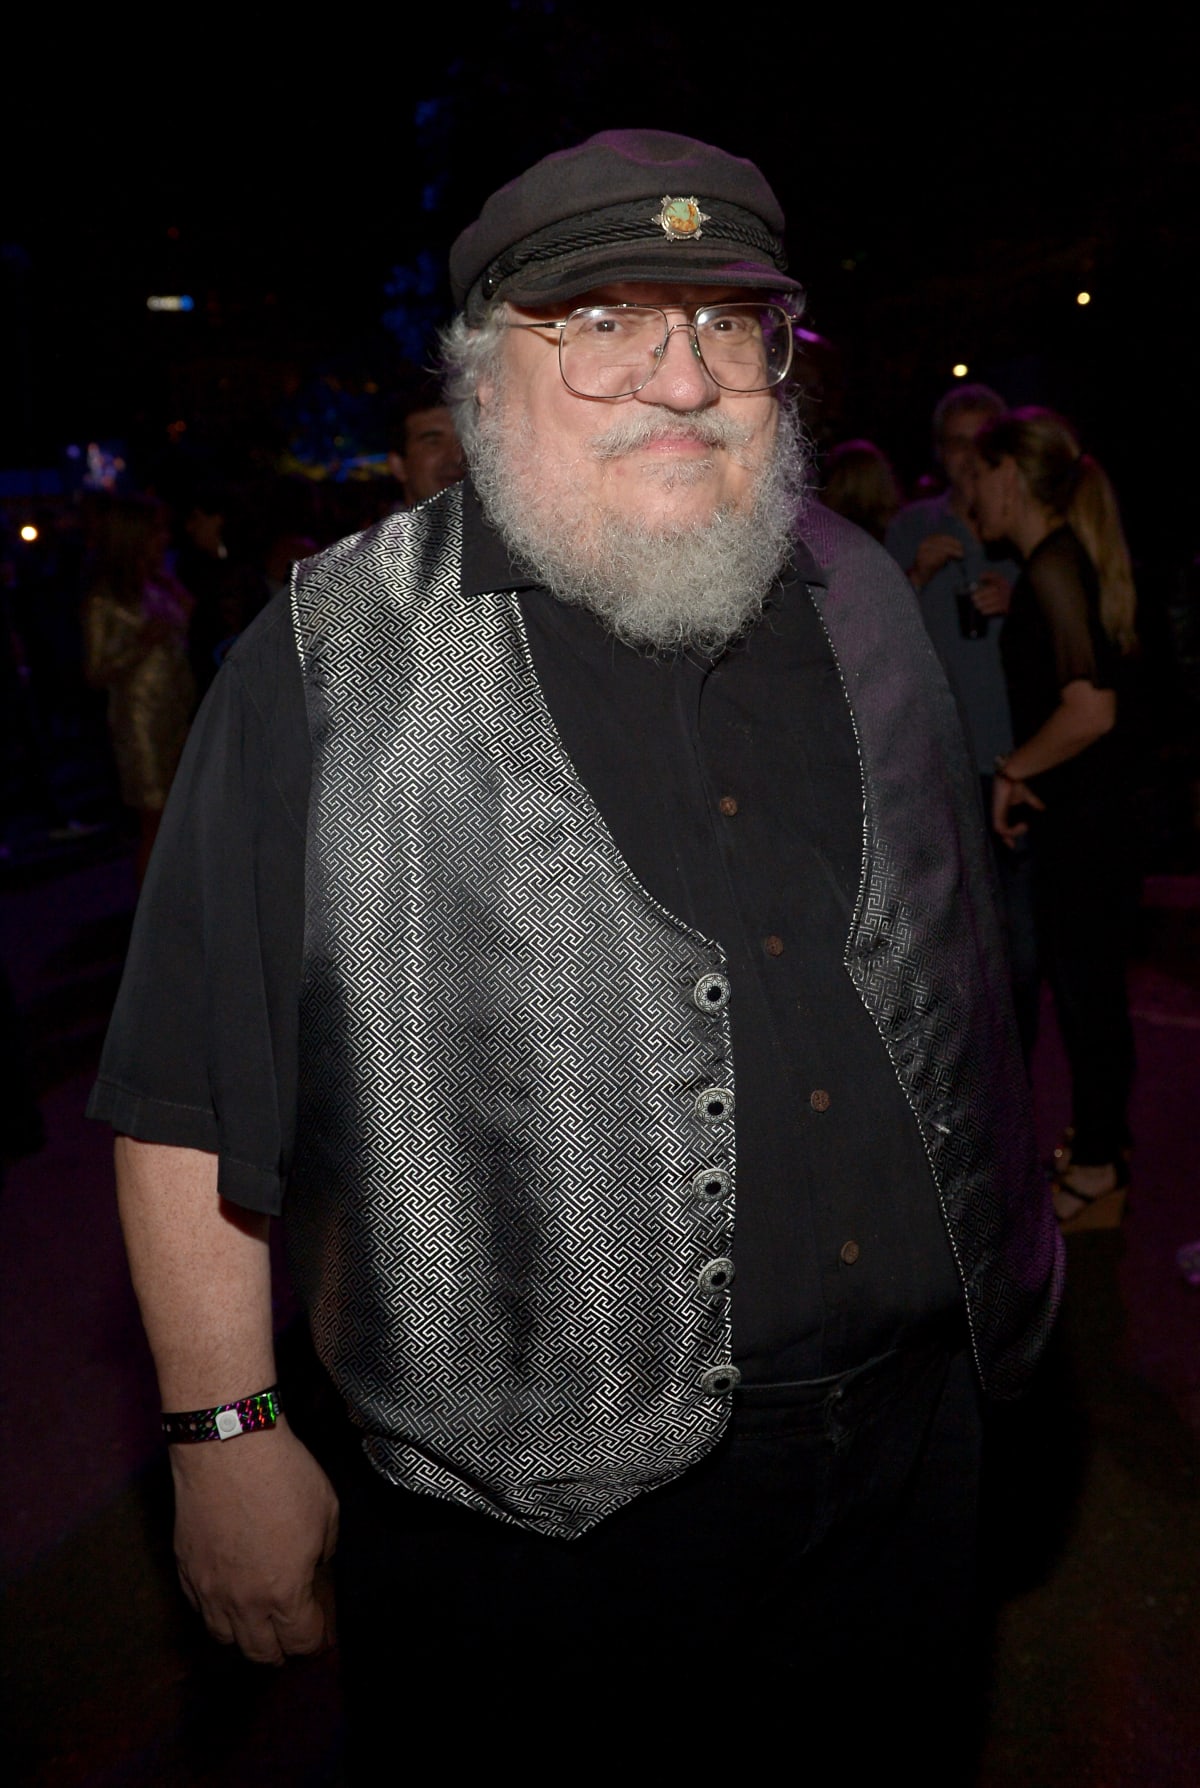 SAN DIEGO, CA - JULY 25:  Novelist George R.R. Martin attends the Playboy and A&E Bates Motel Event During Comic-Con Weekend, on July 25, 2014 in San Diego, California.  (Photo by Charley Gallay/Getty Images for Playboy)